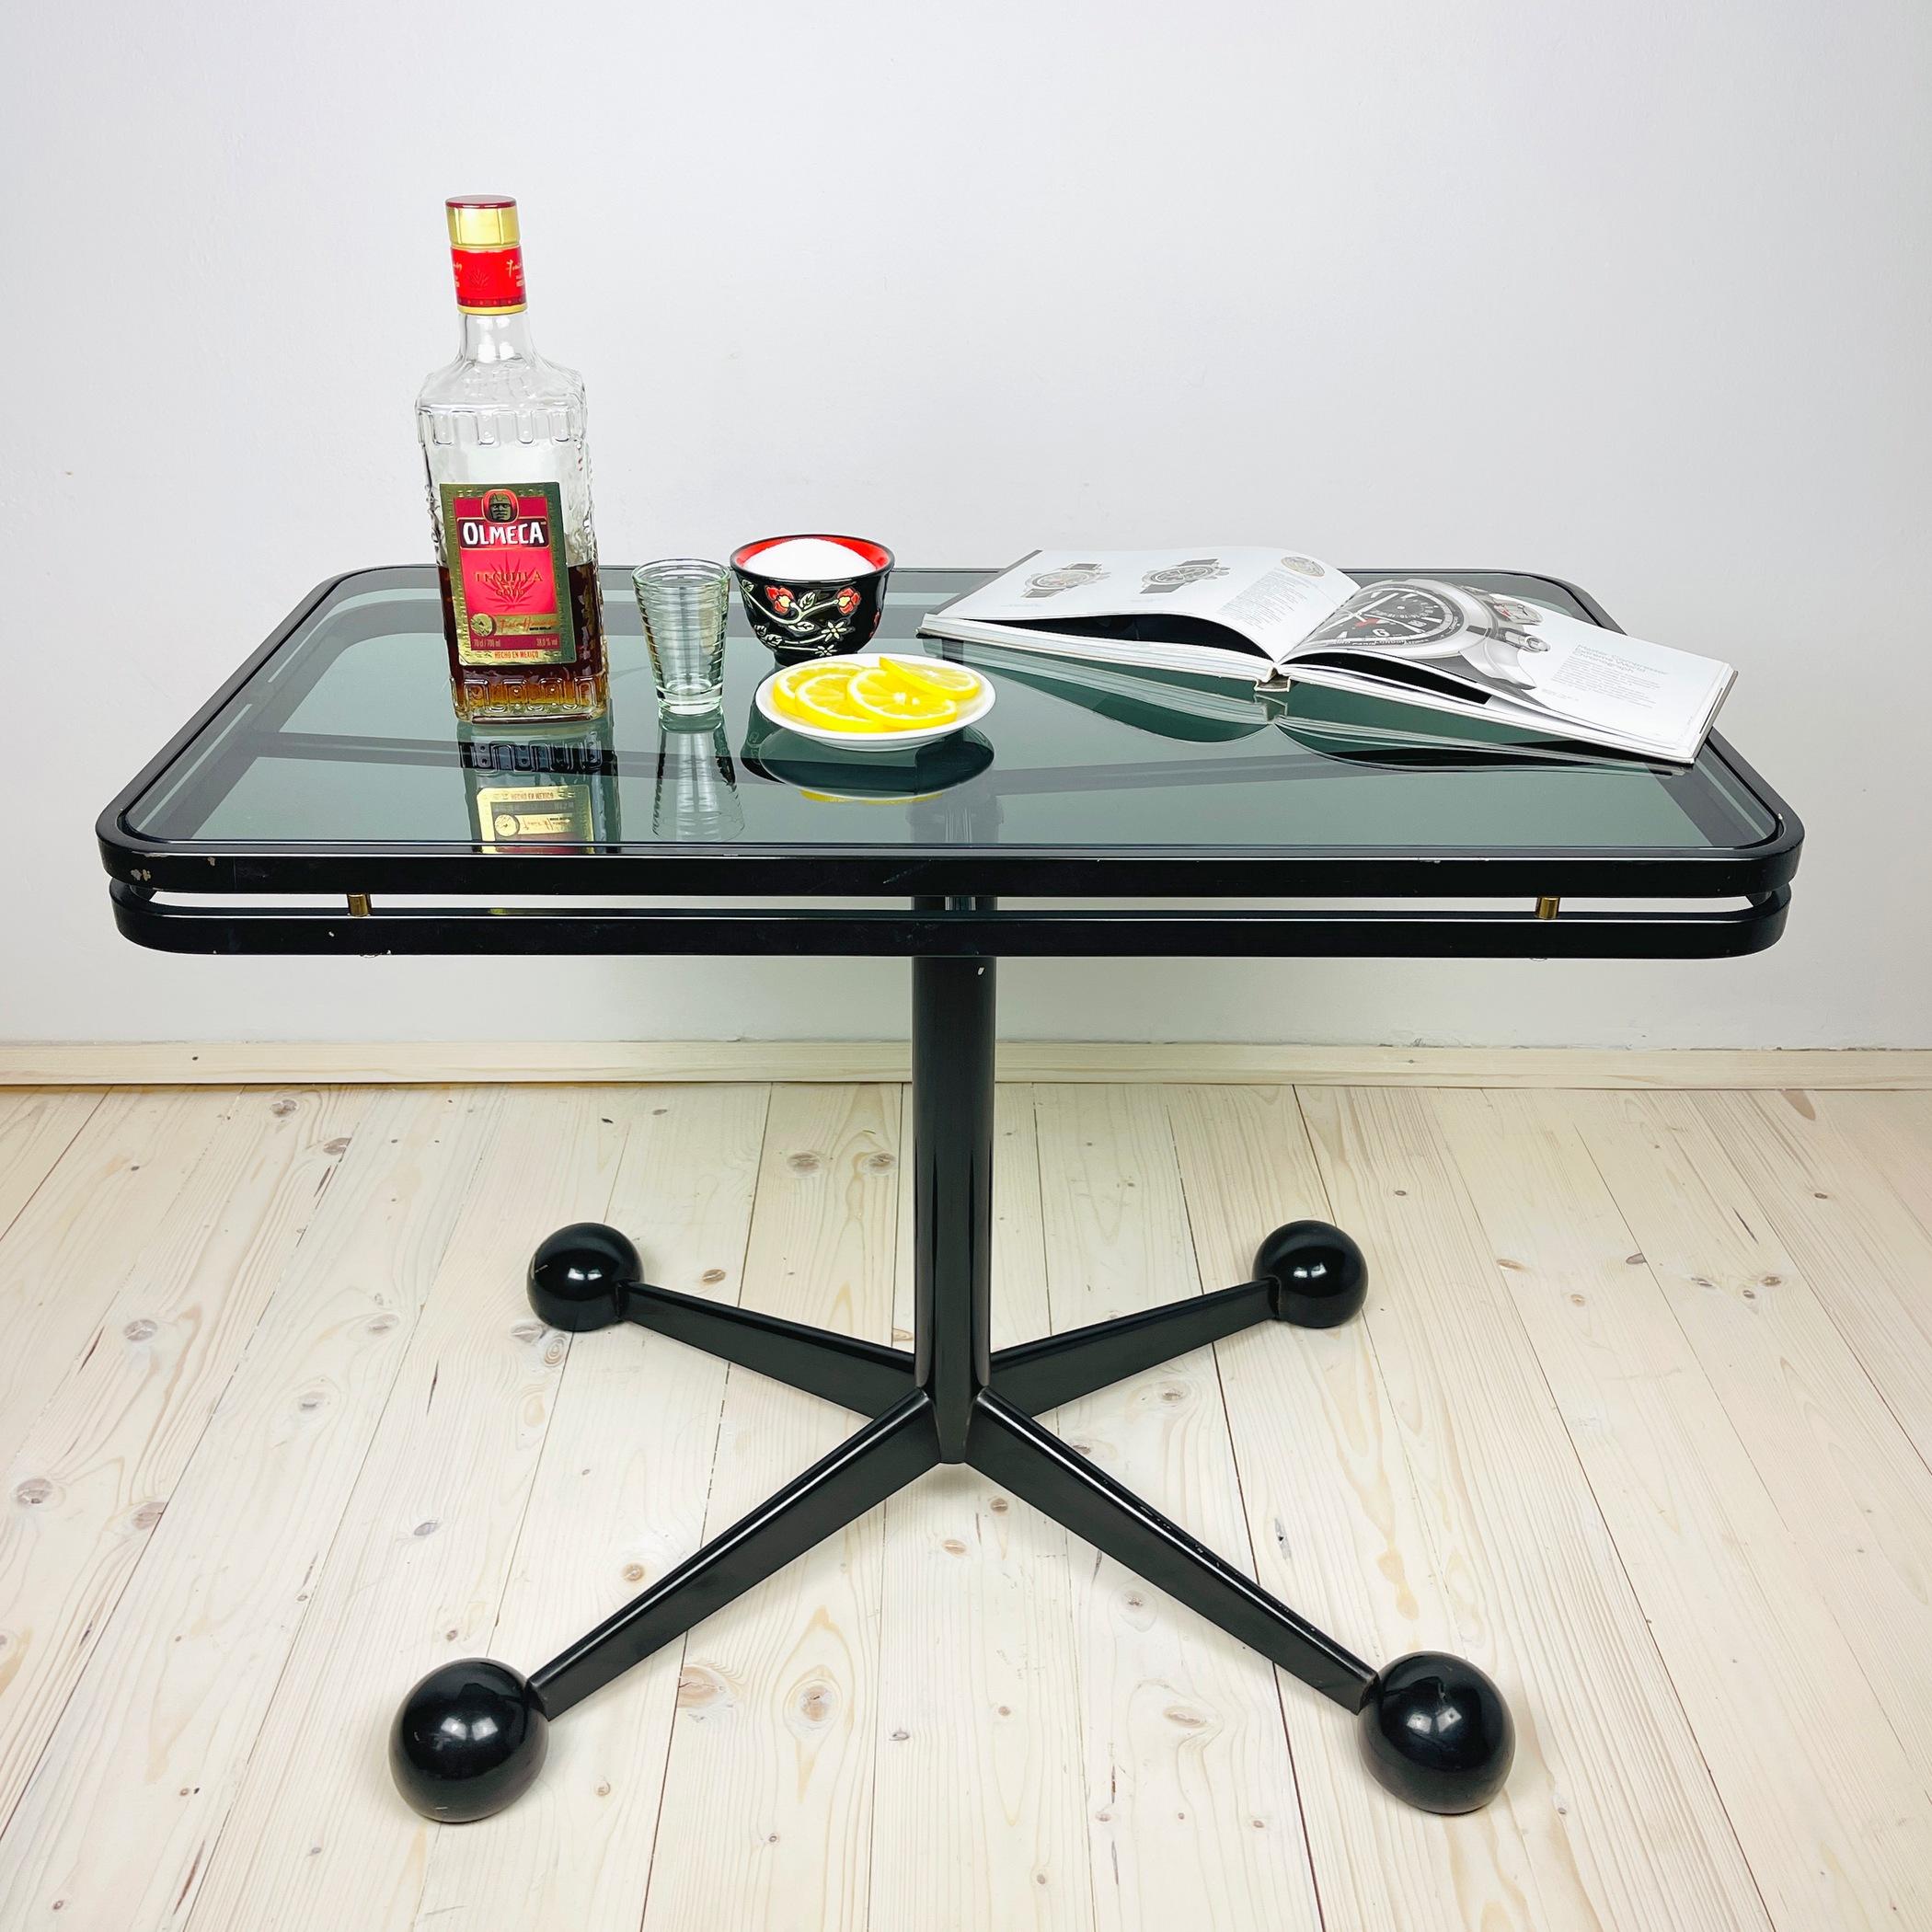 Height adjustable table or trolley by Allegri Arredamenti made in Parma, Italy in the 1970s. The metal base on wheels and the thick smoky glass typical of the time. Its height is adaptable from 58 cm to 98 cm height.
In the 1970s, it was a thing